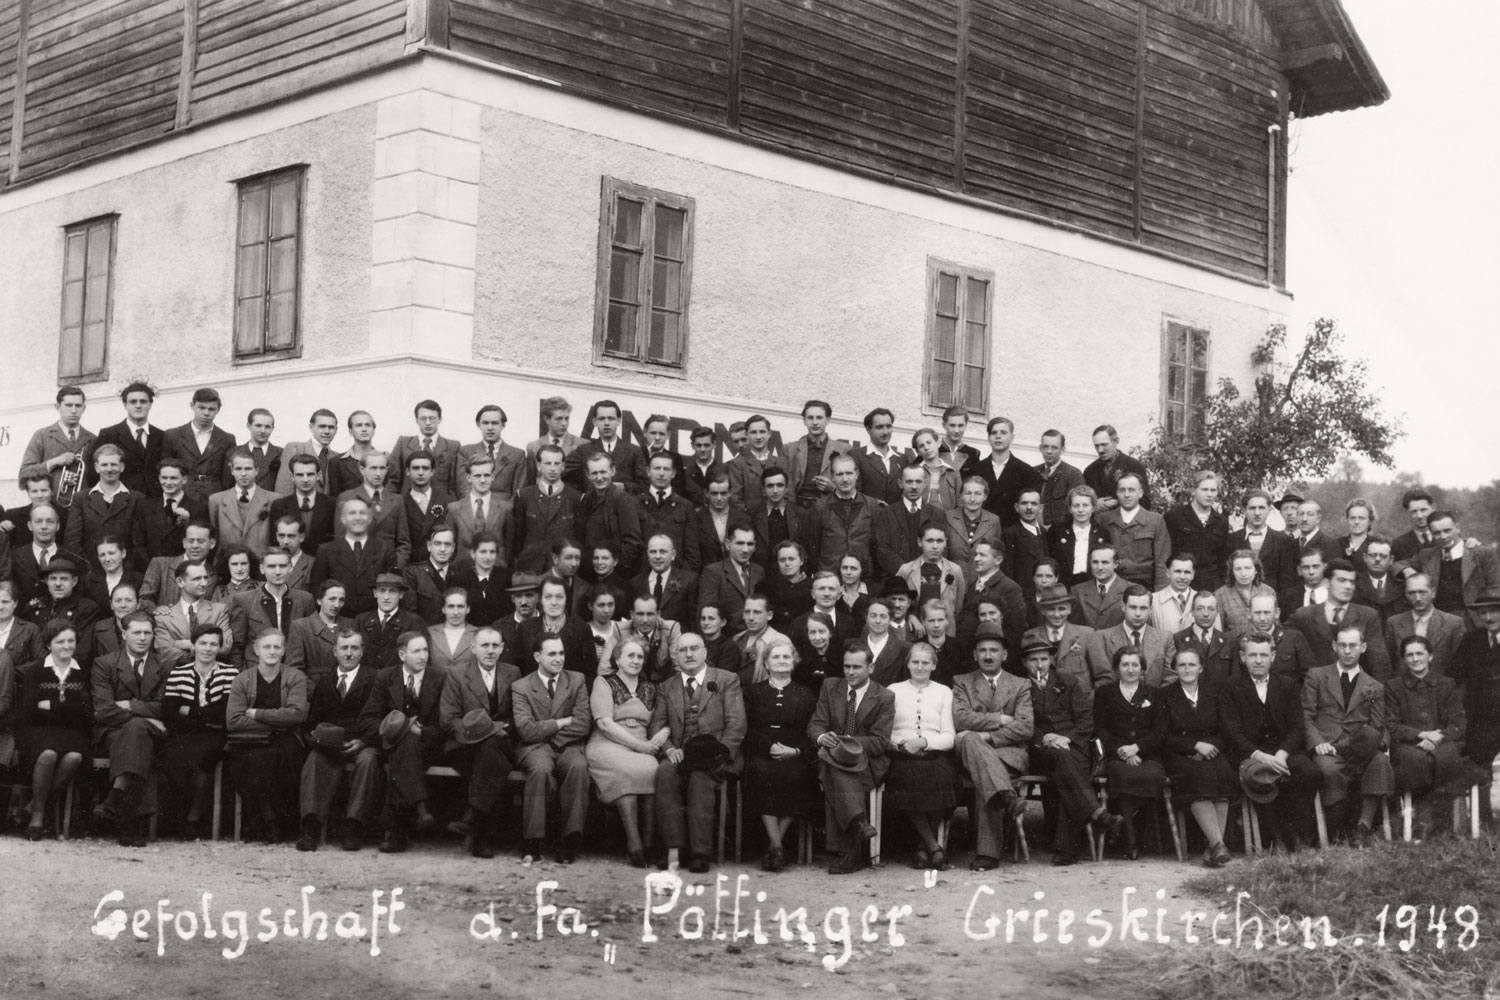 Shortly after the war, PÖTTINGER already had so many employees that it is easy to imagine the cramped working conditions in Plant I.